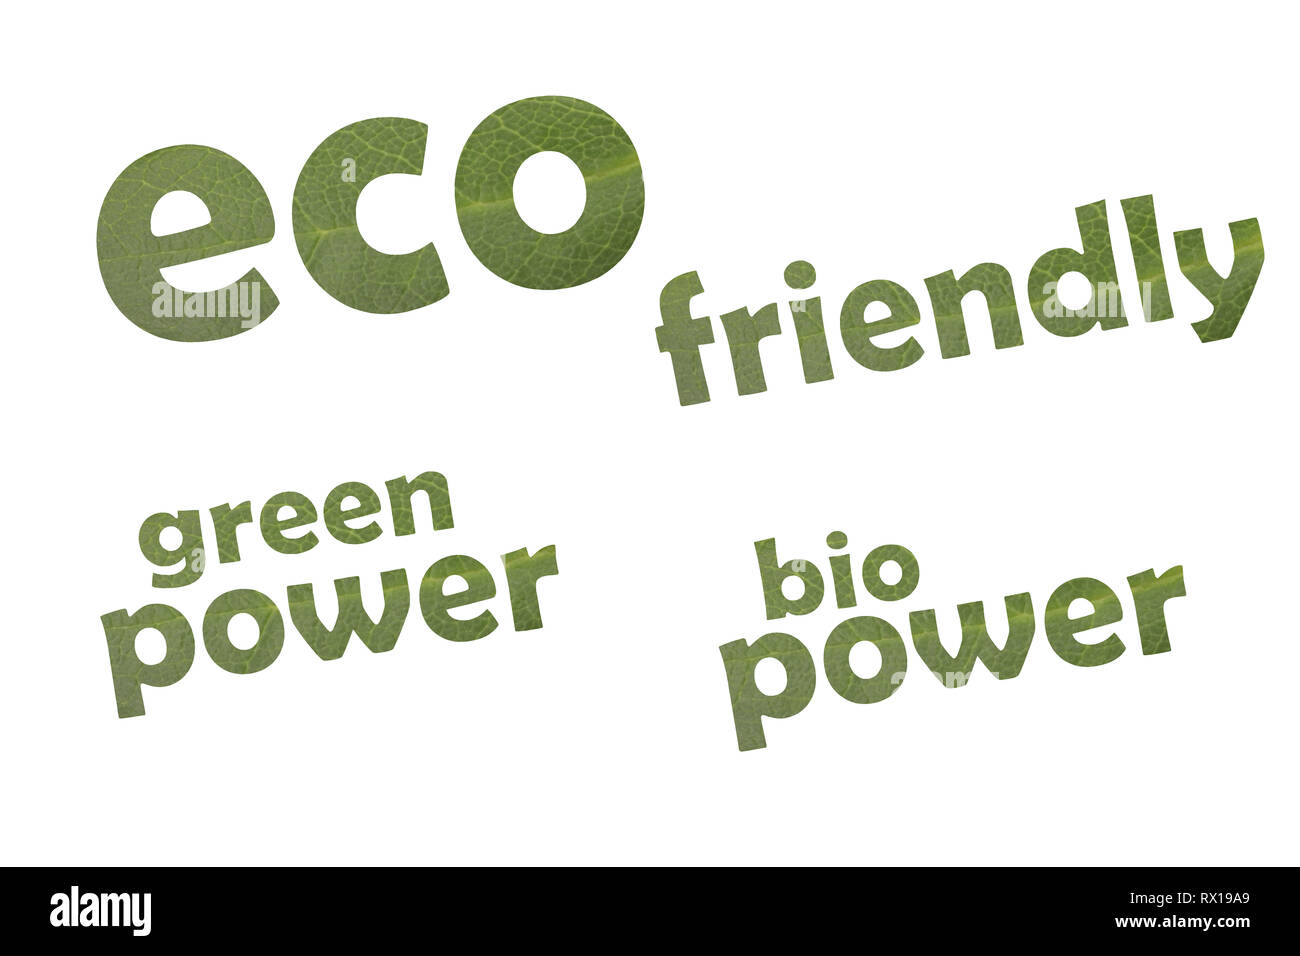 Collection of the keywords eco friendly, green power and bio power cut out of a green leaf Stock Photo